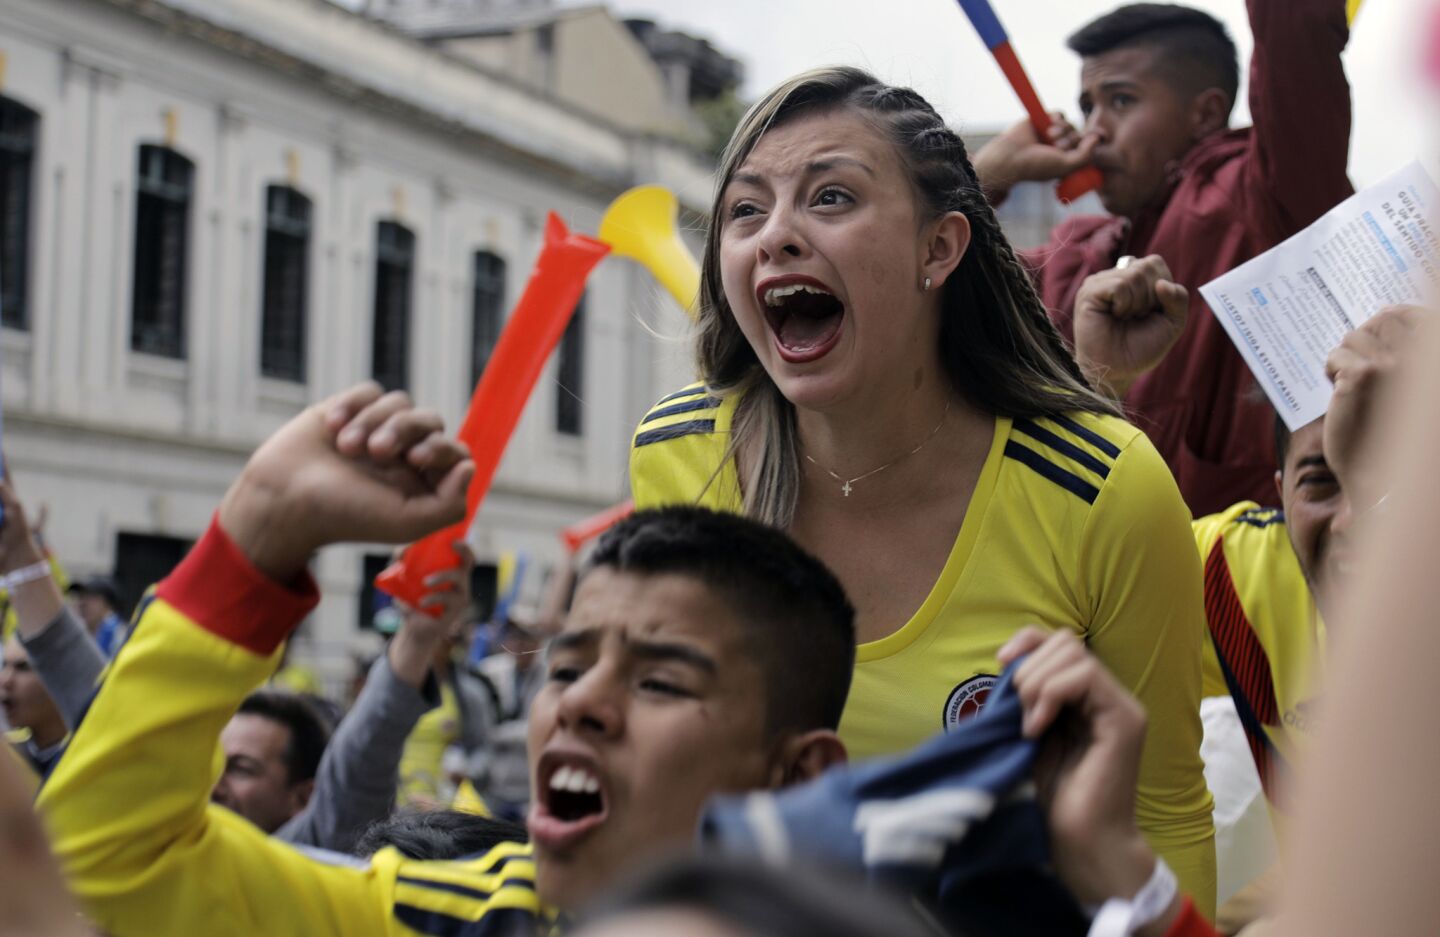 COLOMBIA-FBL-WC-2018-COL-POL-SUPPORTERS